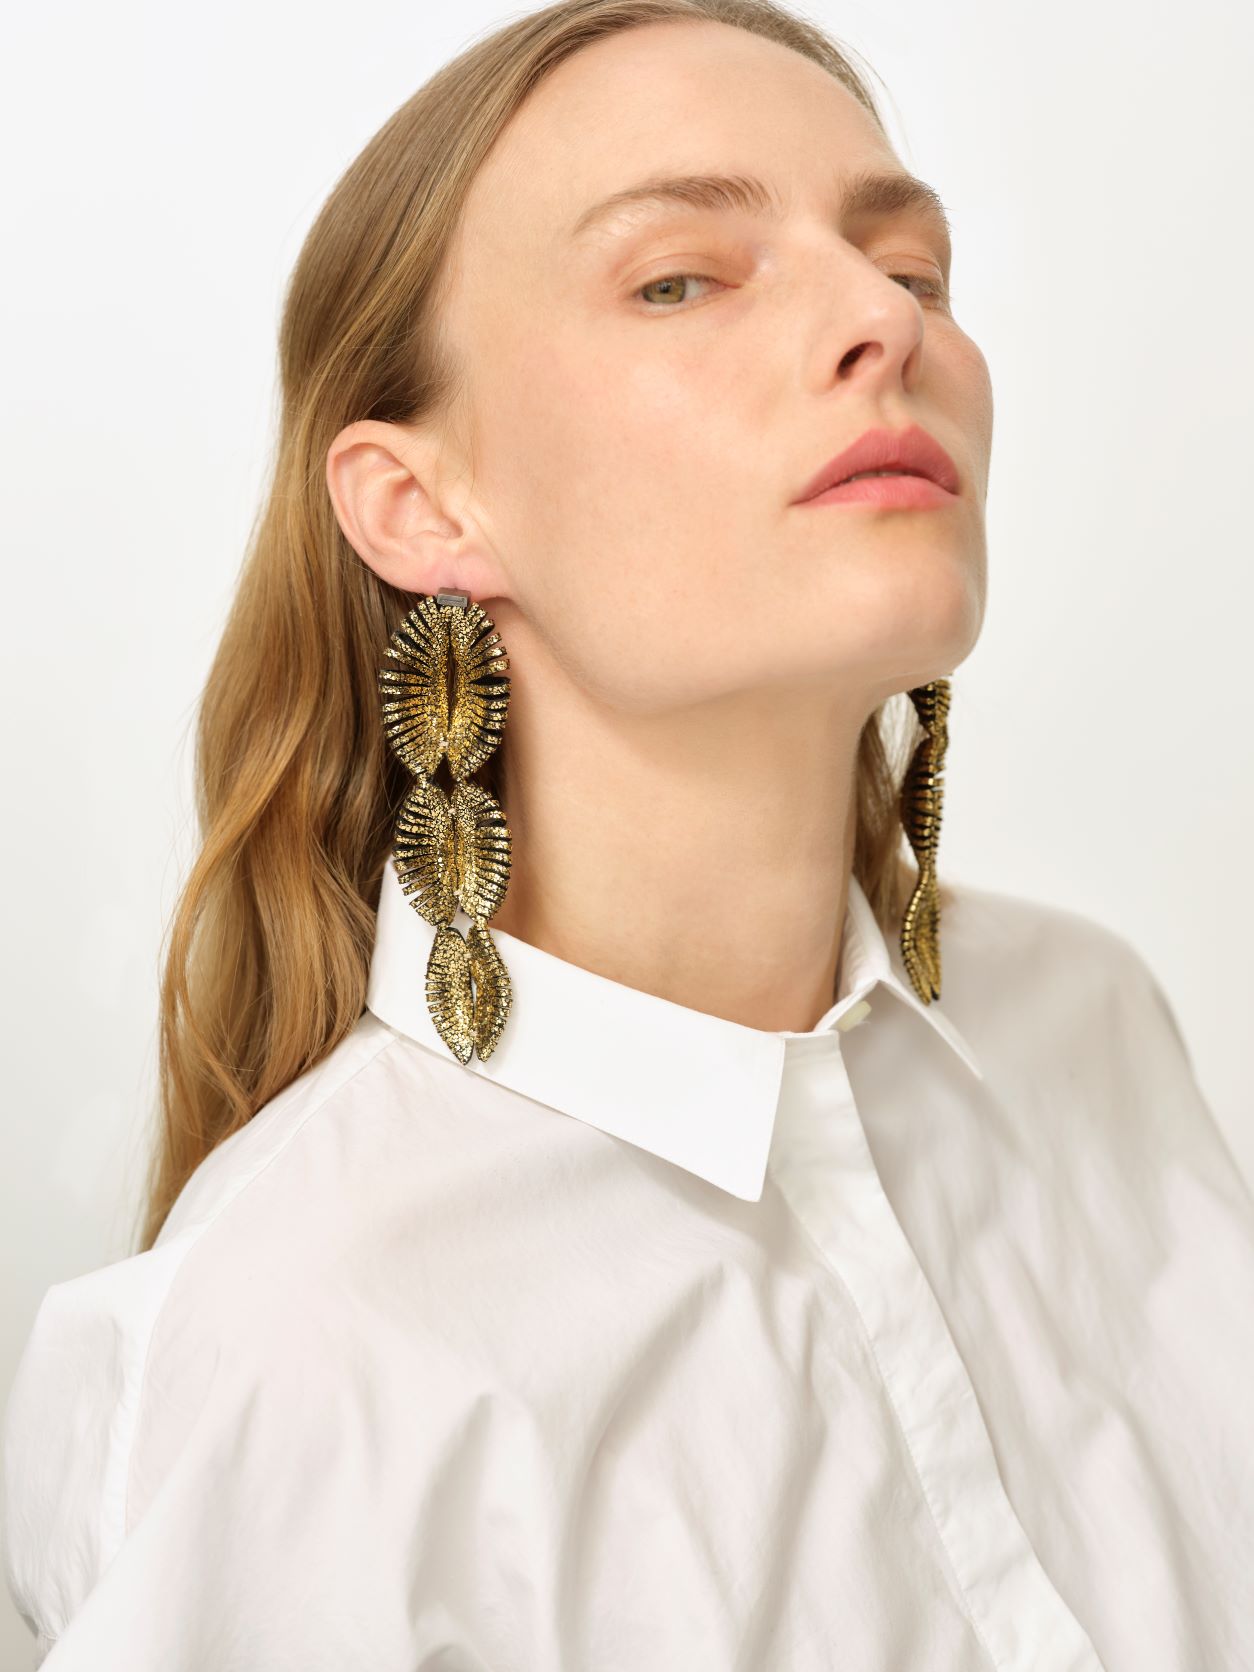 Loie Earrings in Gold Leather, Image courtesy of So=Le Studio